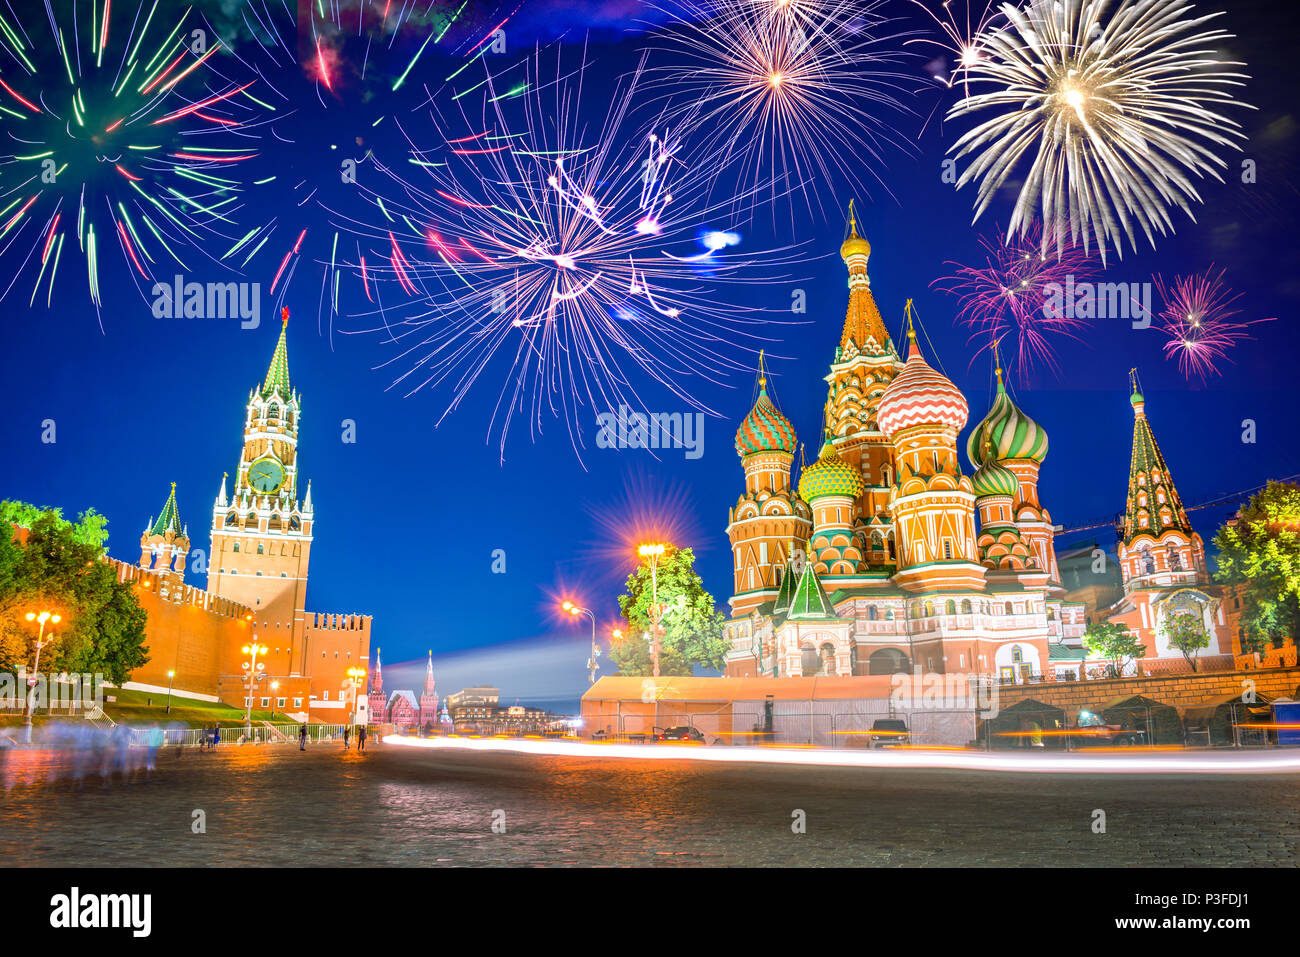 Fireworks over St Basil's cathedral and Kremlin on Red Square at night, Moscow, Russia Stock Photo